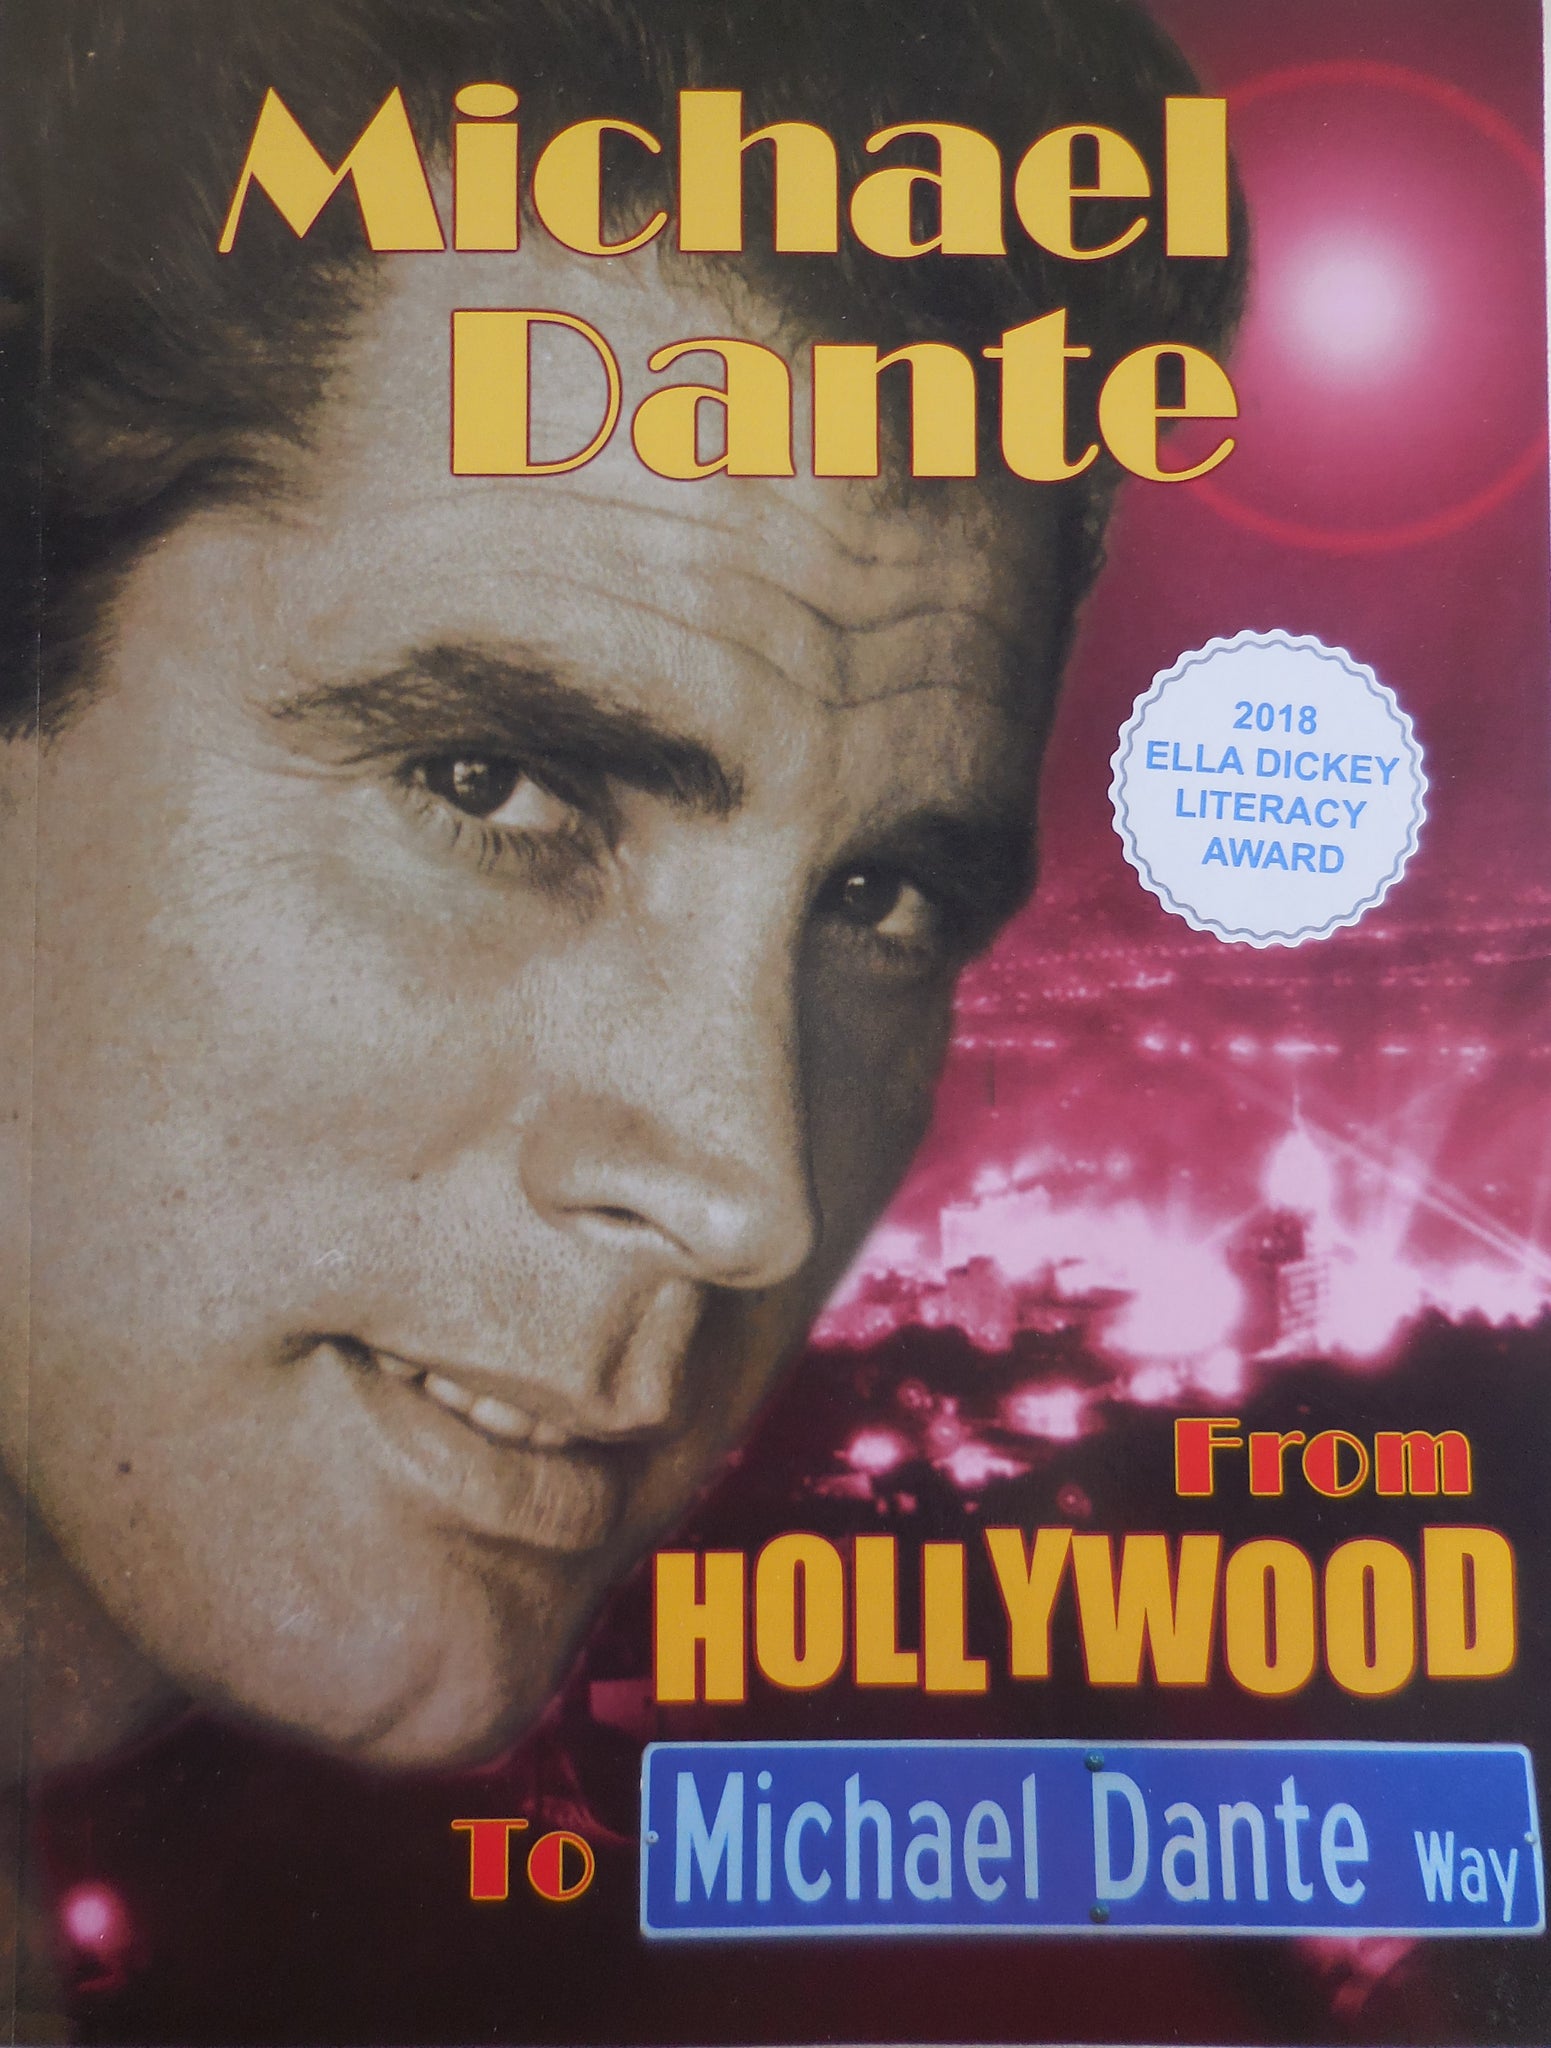 FROM HOLLYWOOD TO MICHAEL DANTE WAY (paperback)